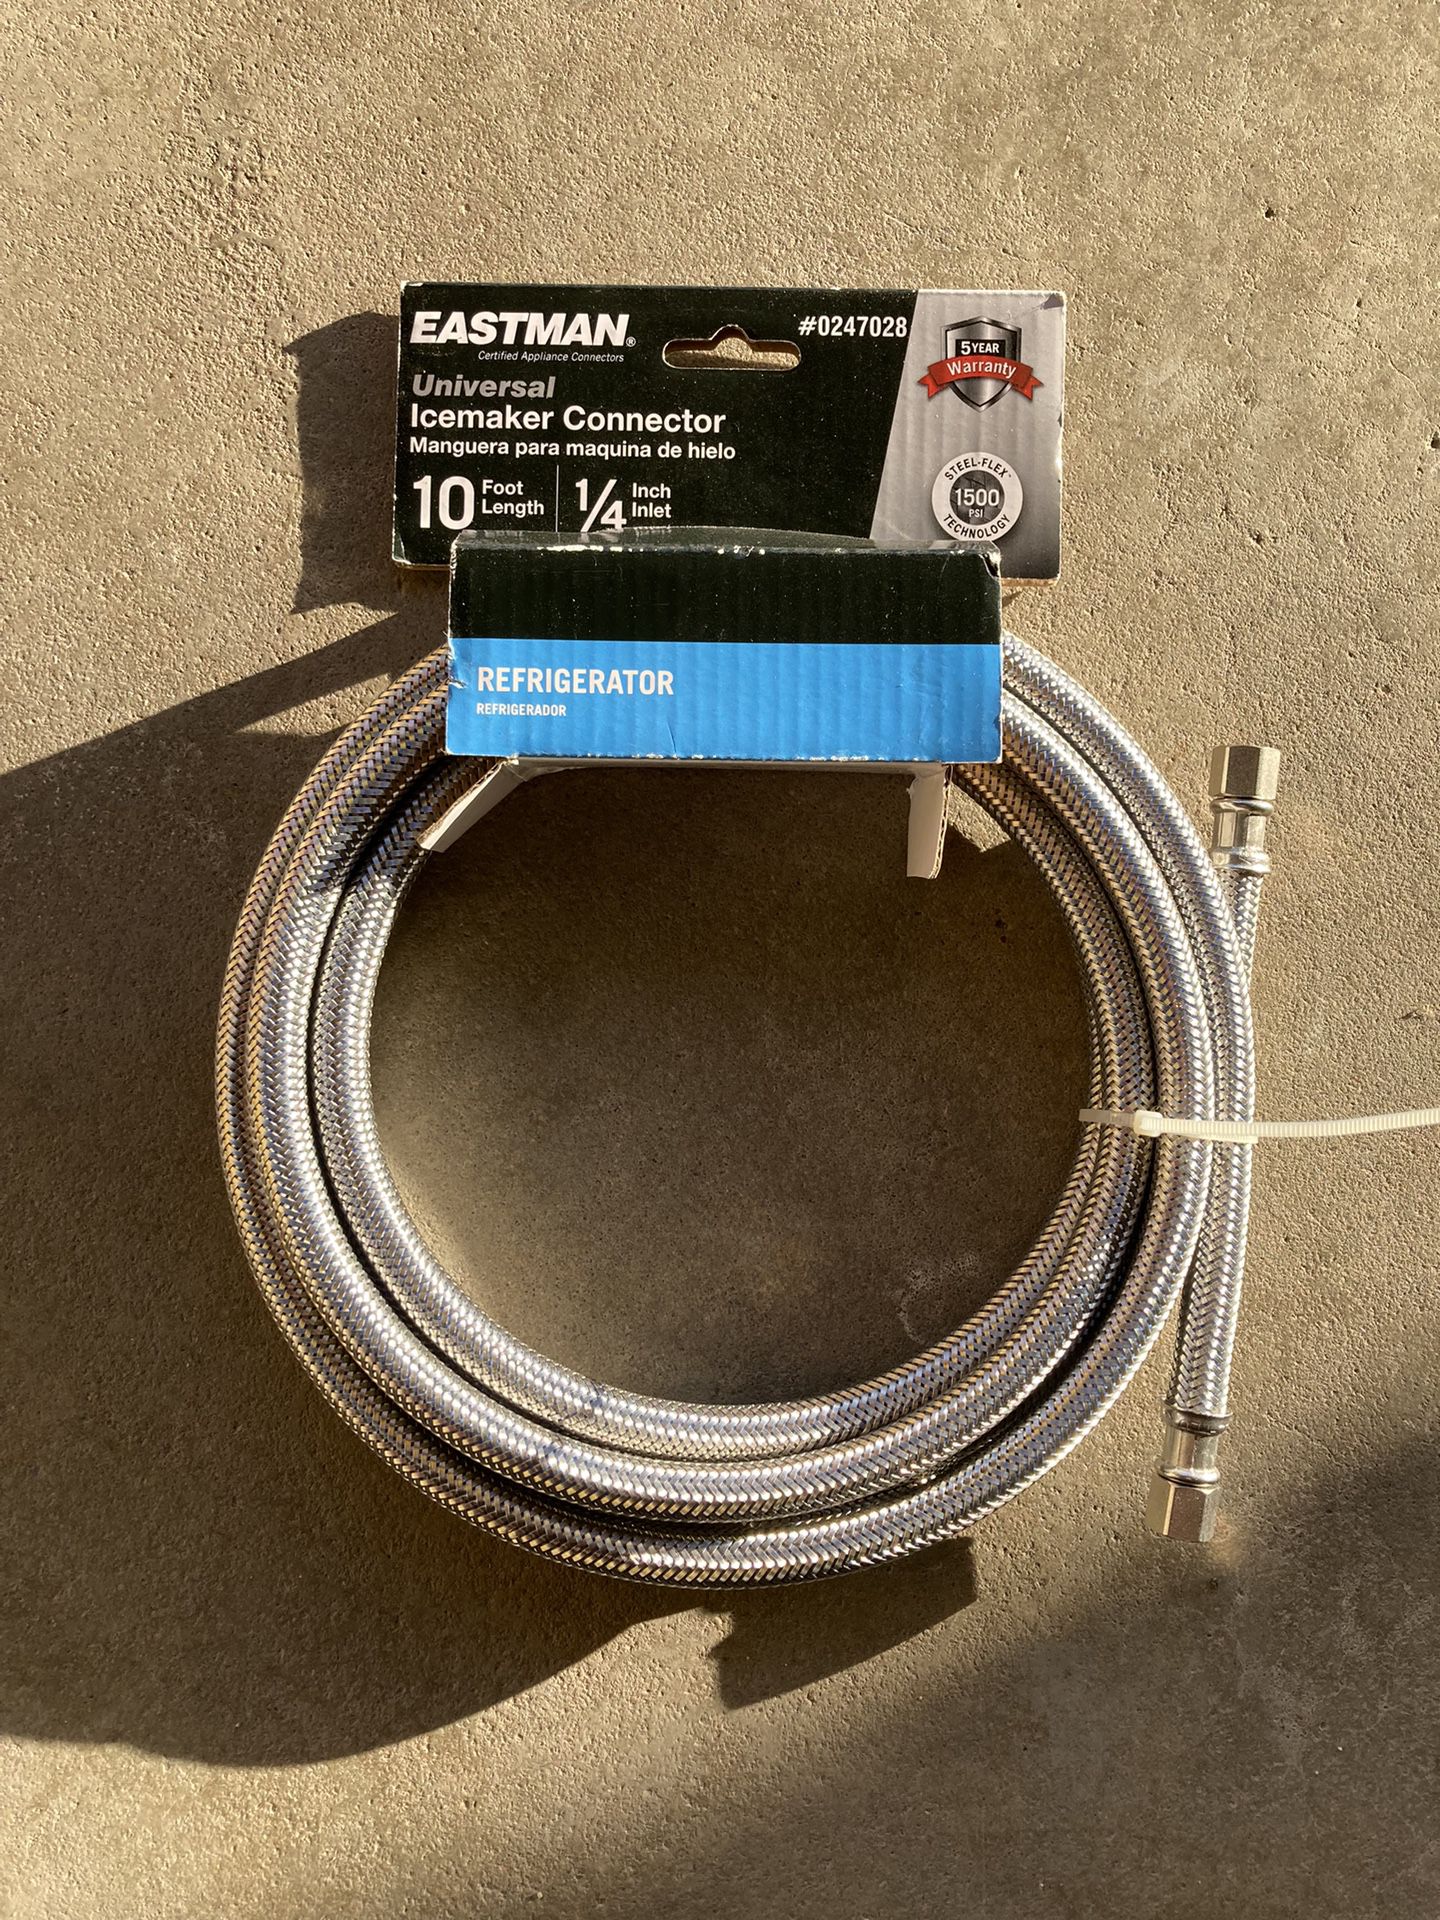 EASTMAN 10-ft 1/4-in Compression Inlet x 1/4-in Compression Outlet Stainless Steel Ice Maker Connector